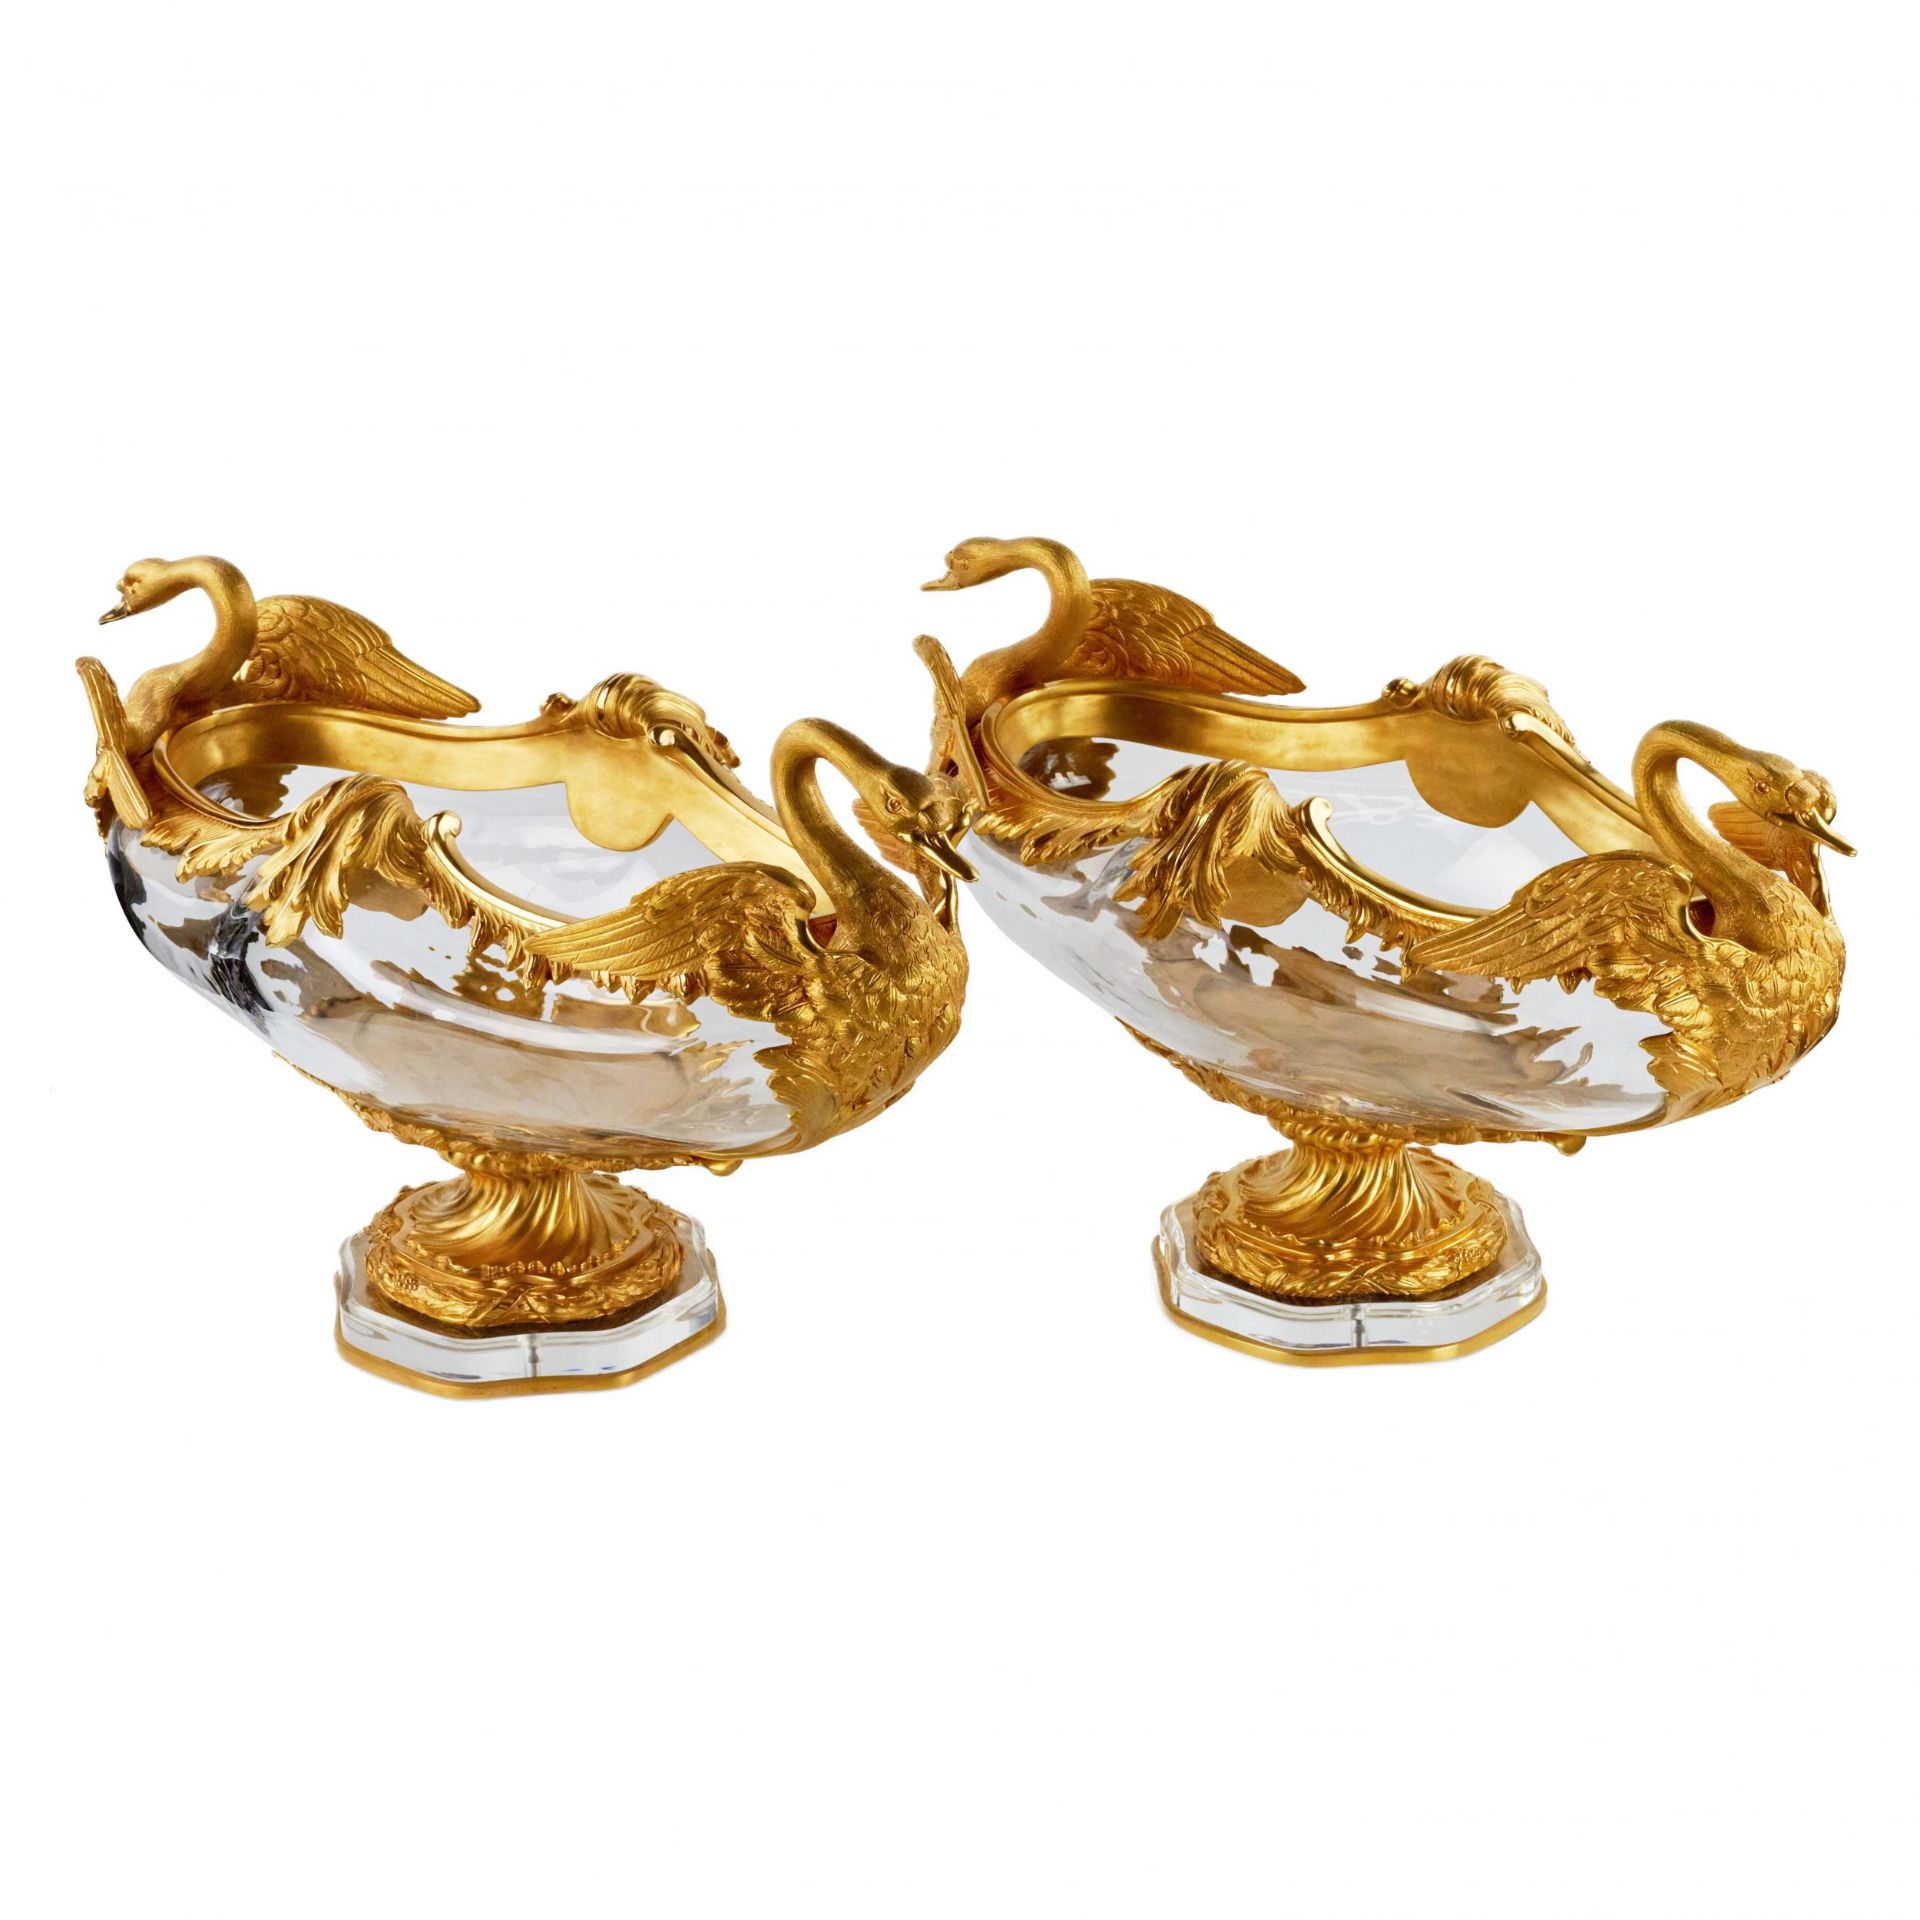 Pair of oval vases in cast glass and gilt bronze, with swan motif. France 20th century. - Image 3 of 8